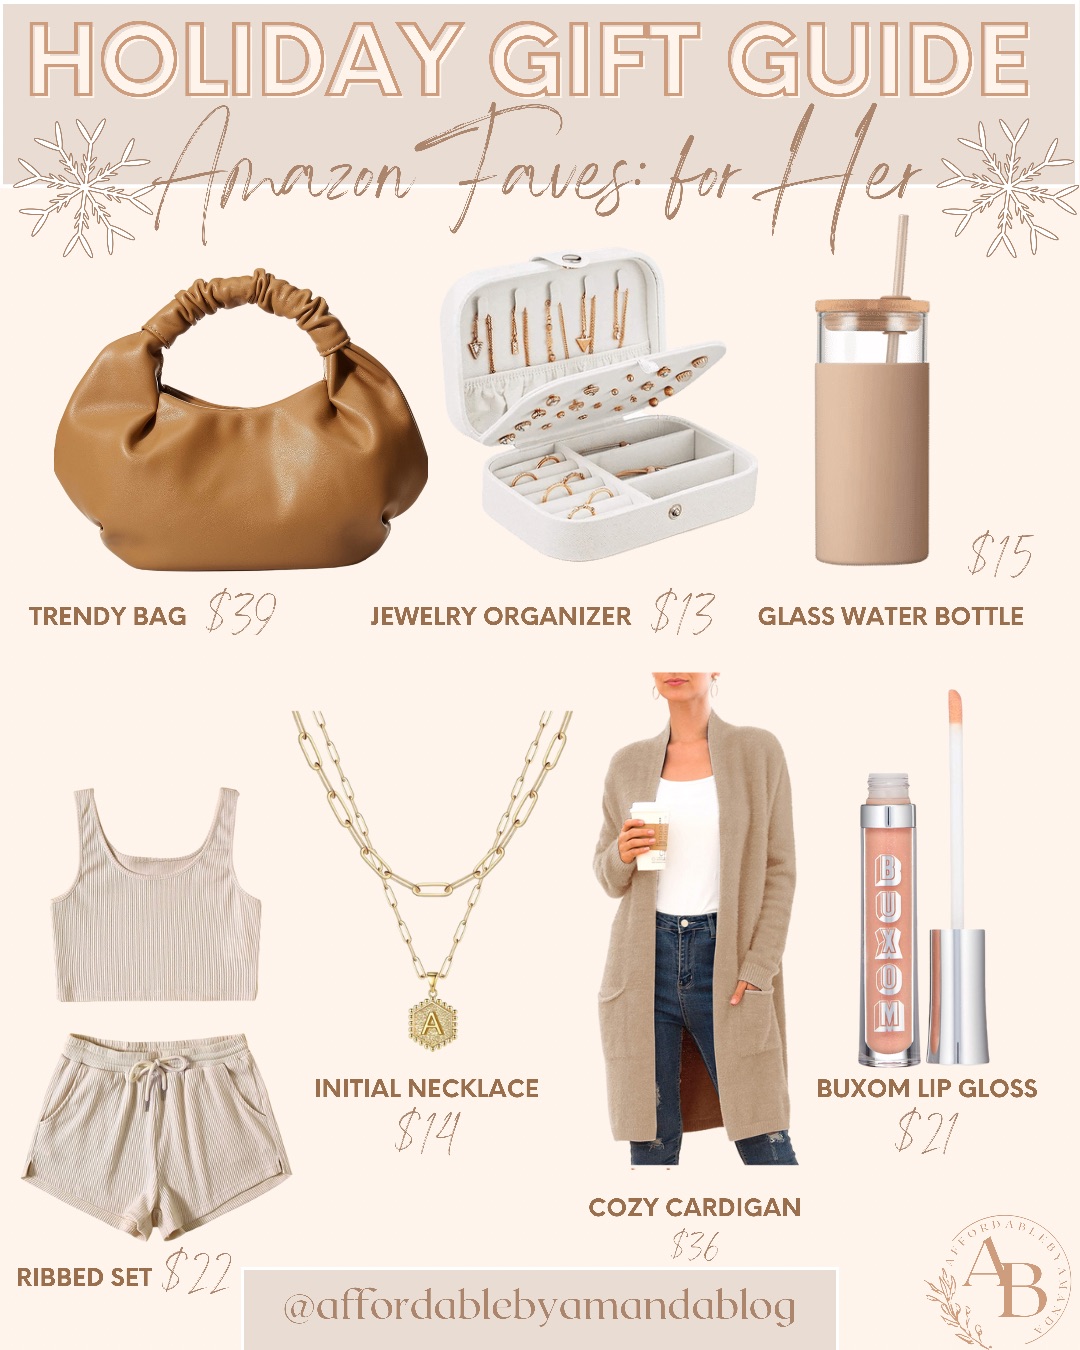 Amazon Gift Ideas - Amazon Holiday Gift Ideas for Her | The Ultimate Amazon Gift Guide